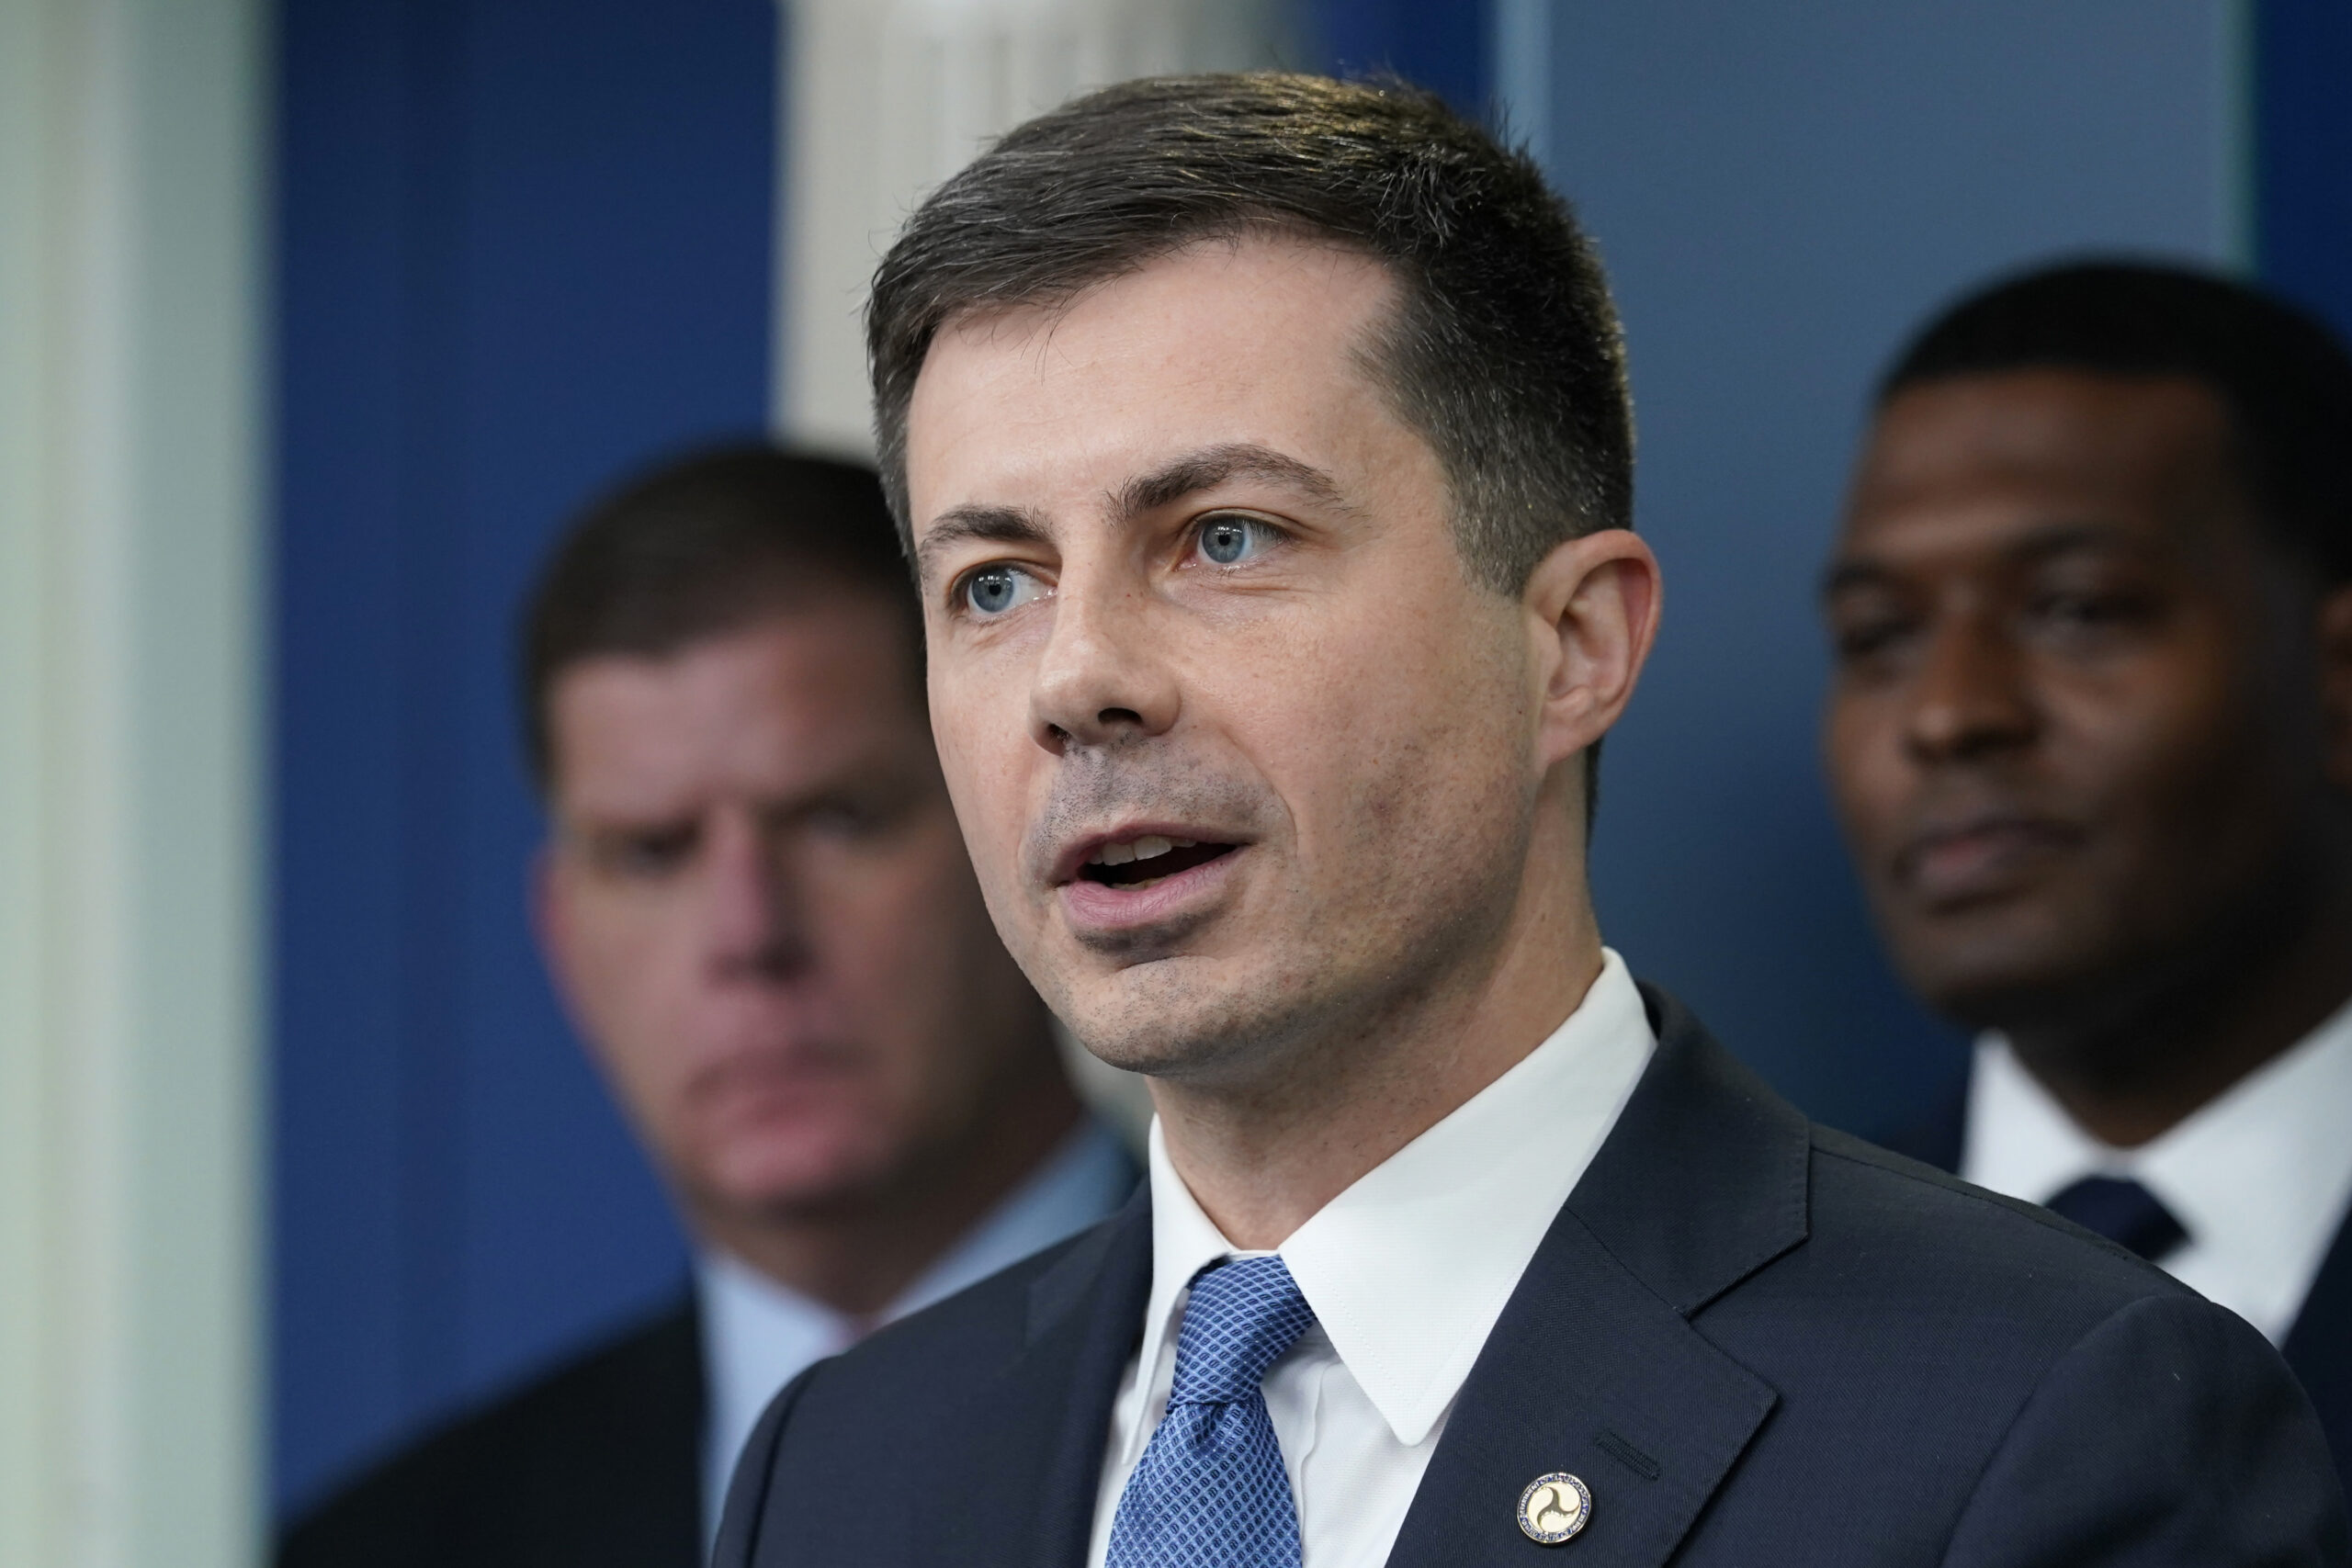 FILE - Transportation Secretary Pete Buttigieg, center, speaks during a briefing at the White House in Washington, May 16, 2022, as Labor Secretary Marty Walsh, left, and Environmental Protection Agency administrator Michael Regan, right, listen. Buttigieg says he is pushing airlines to hire more customer-service people and take other steps to help travelers this summer. (AP Photo/Susan Walsh, File)